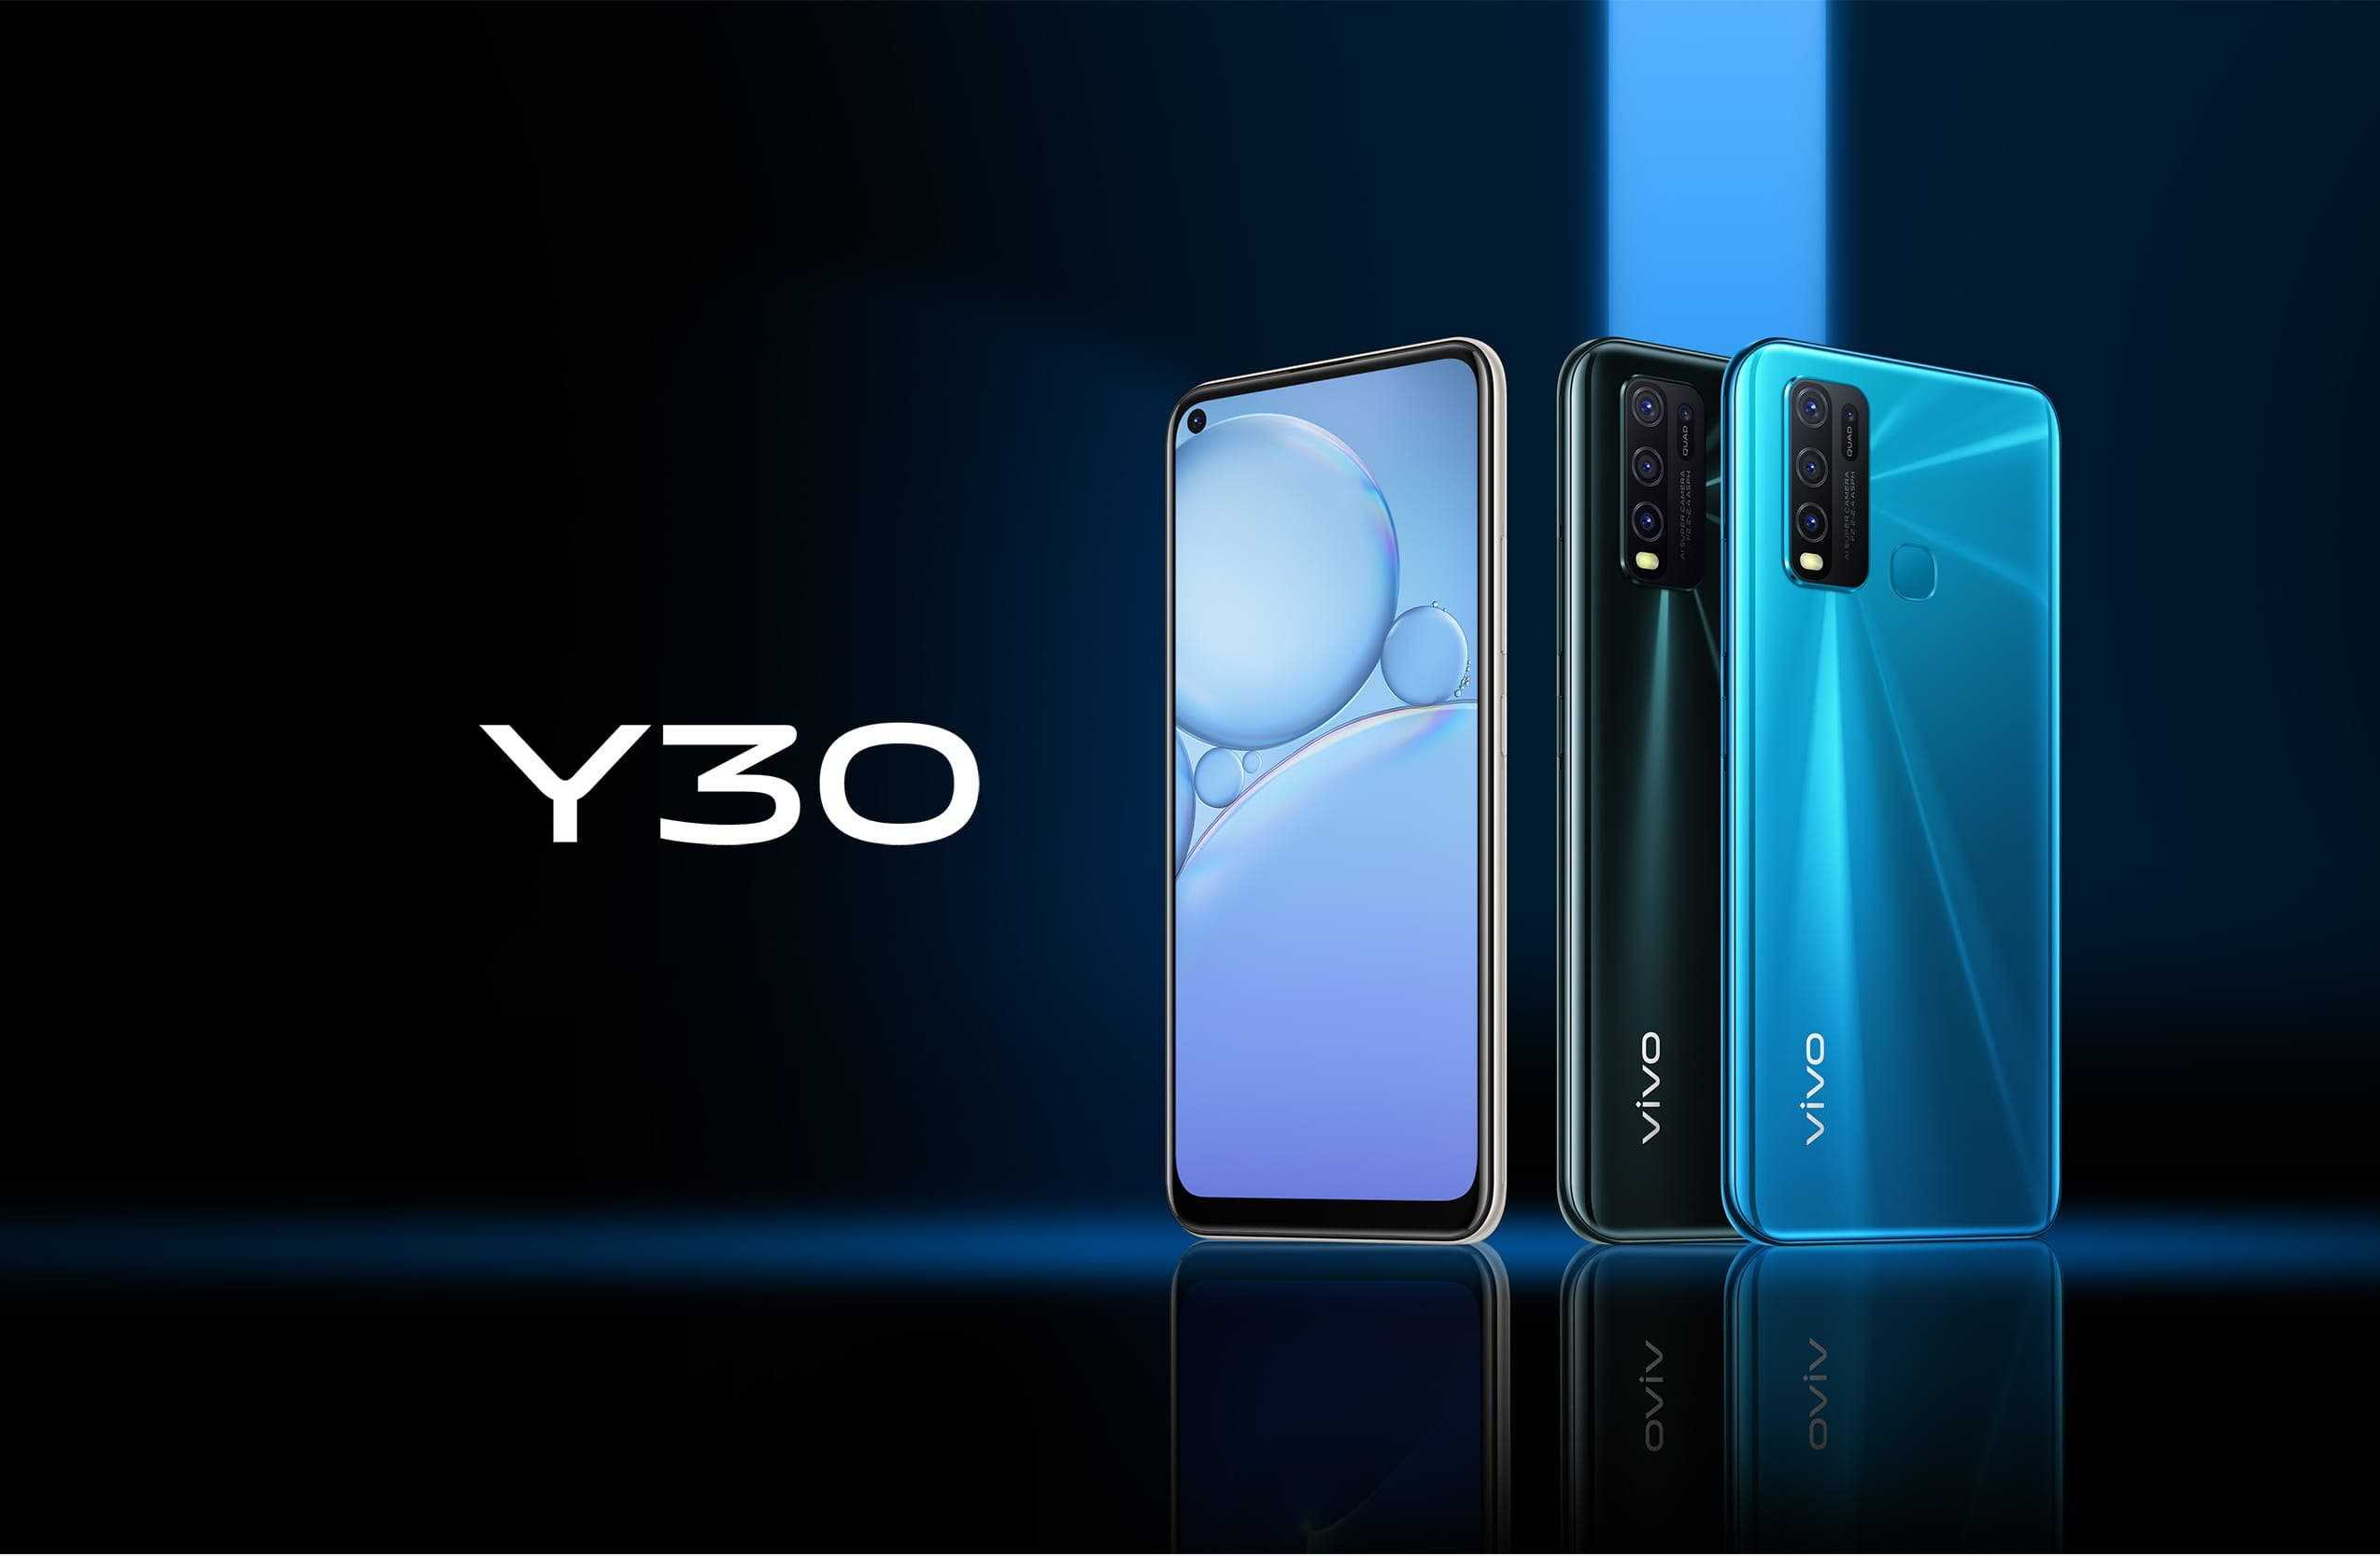 Vivo launches the Y30 smartphone in India today; First sale begins at 8PM.